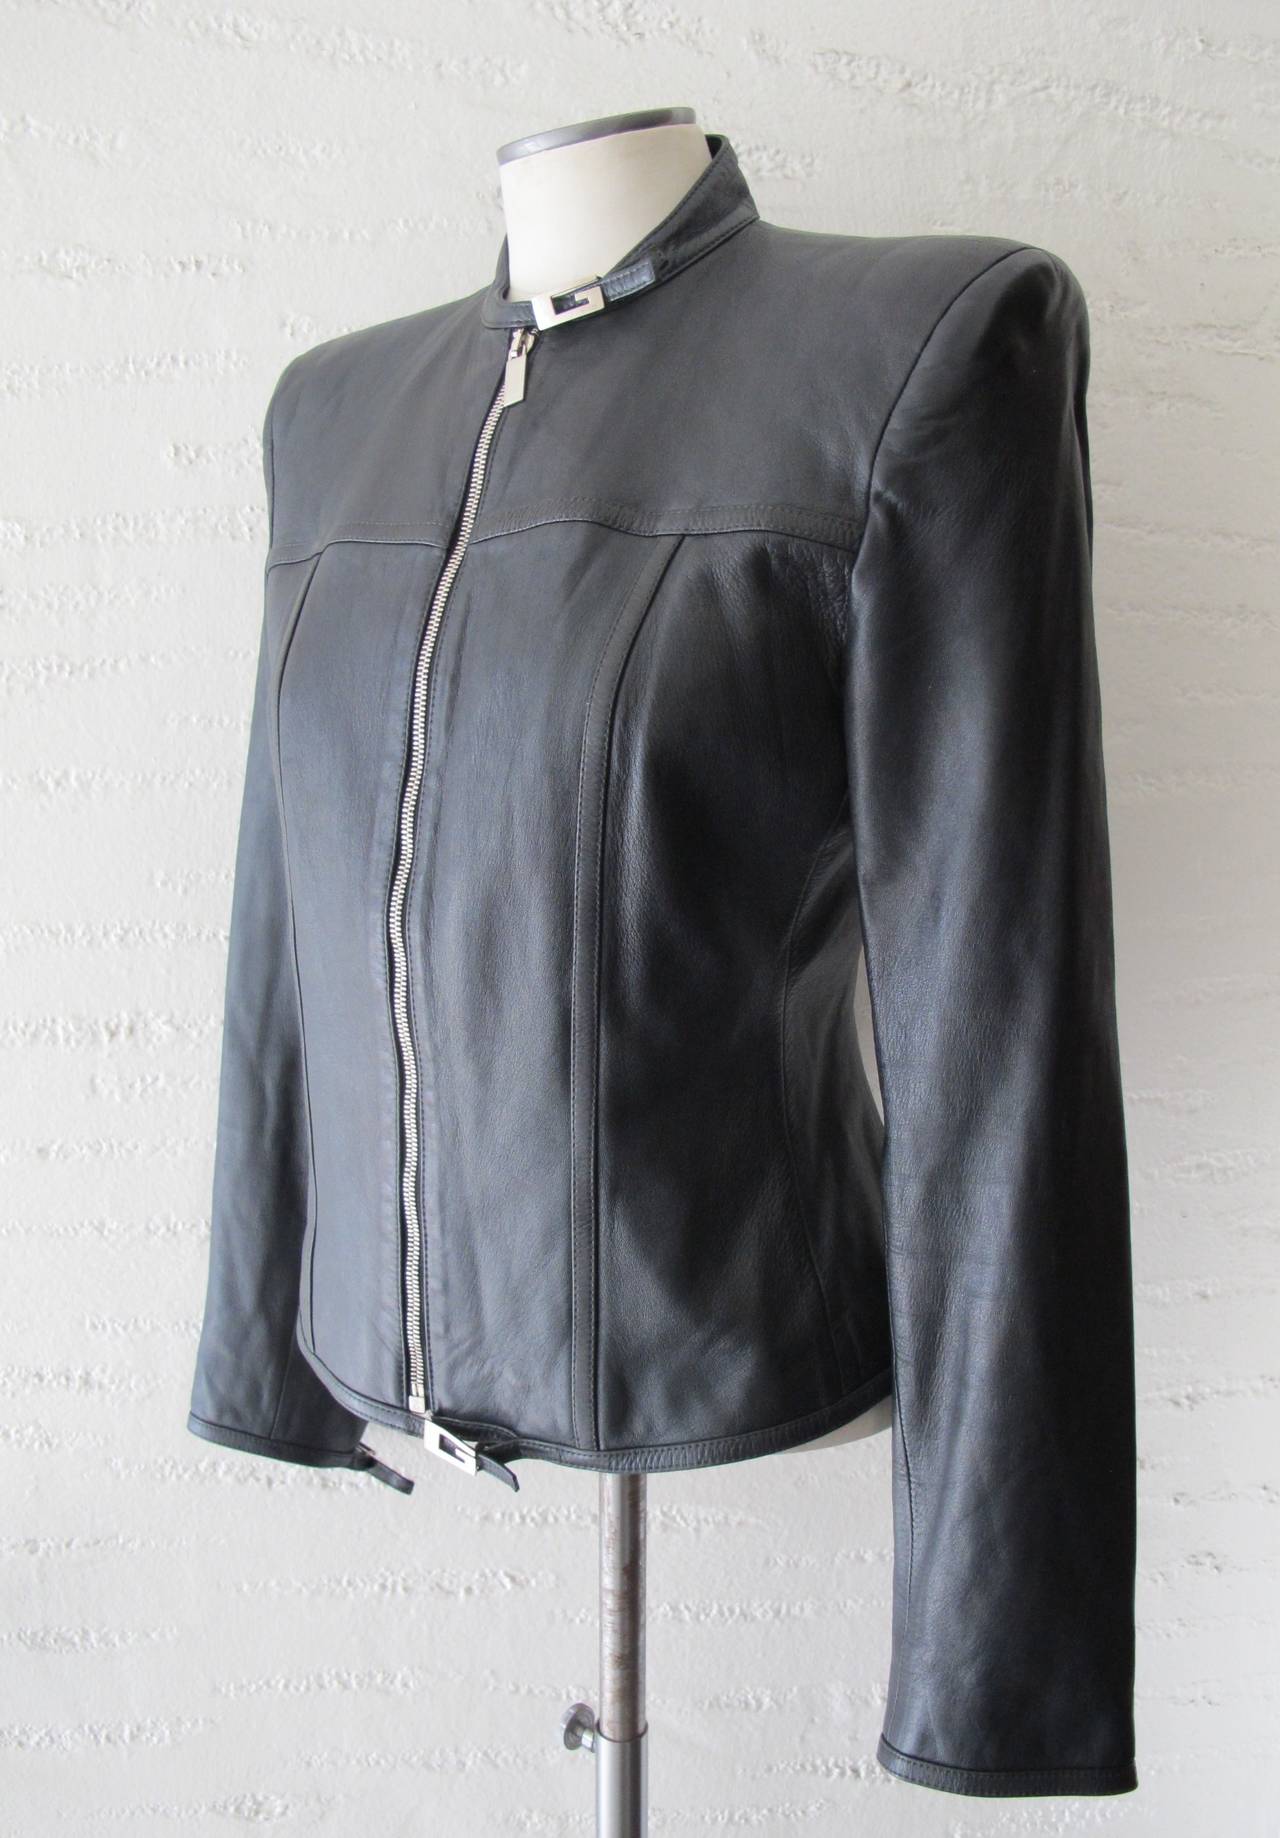 Iconic Tom Ford Black Leather Jacket for Gucci In Excellent Condition For Sale In San Francisco, CA